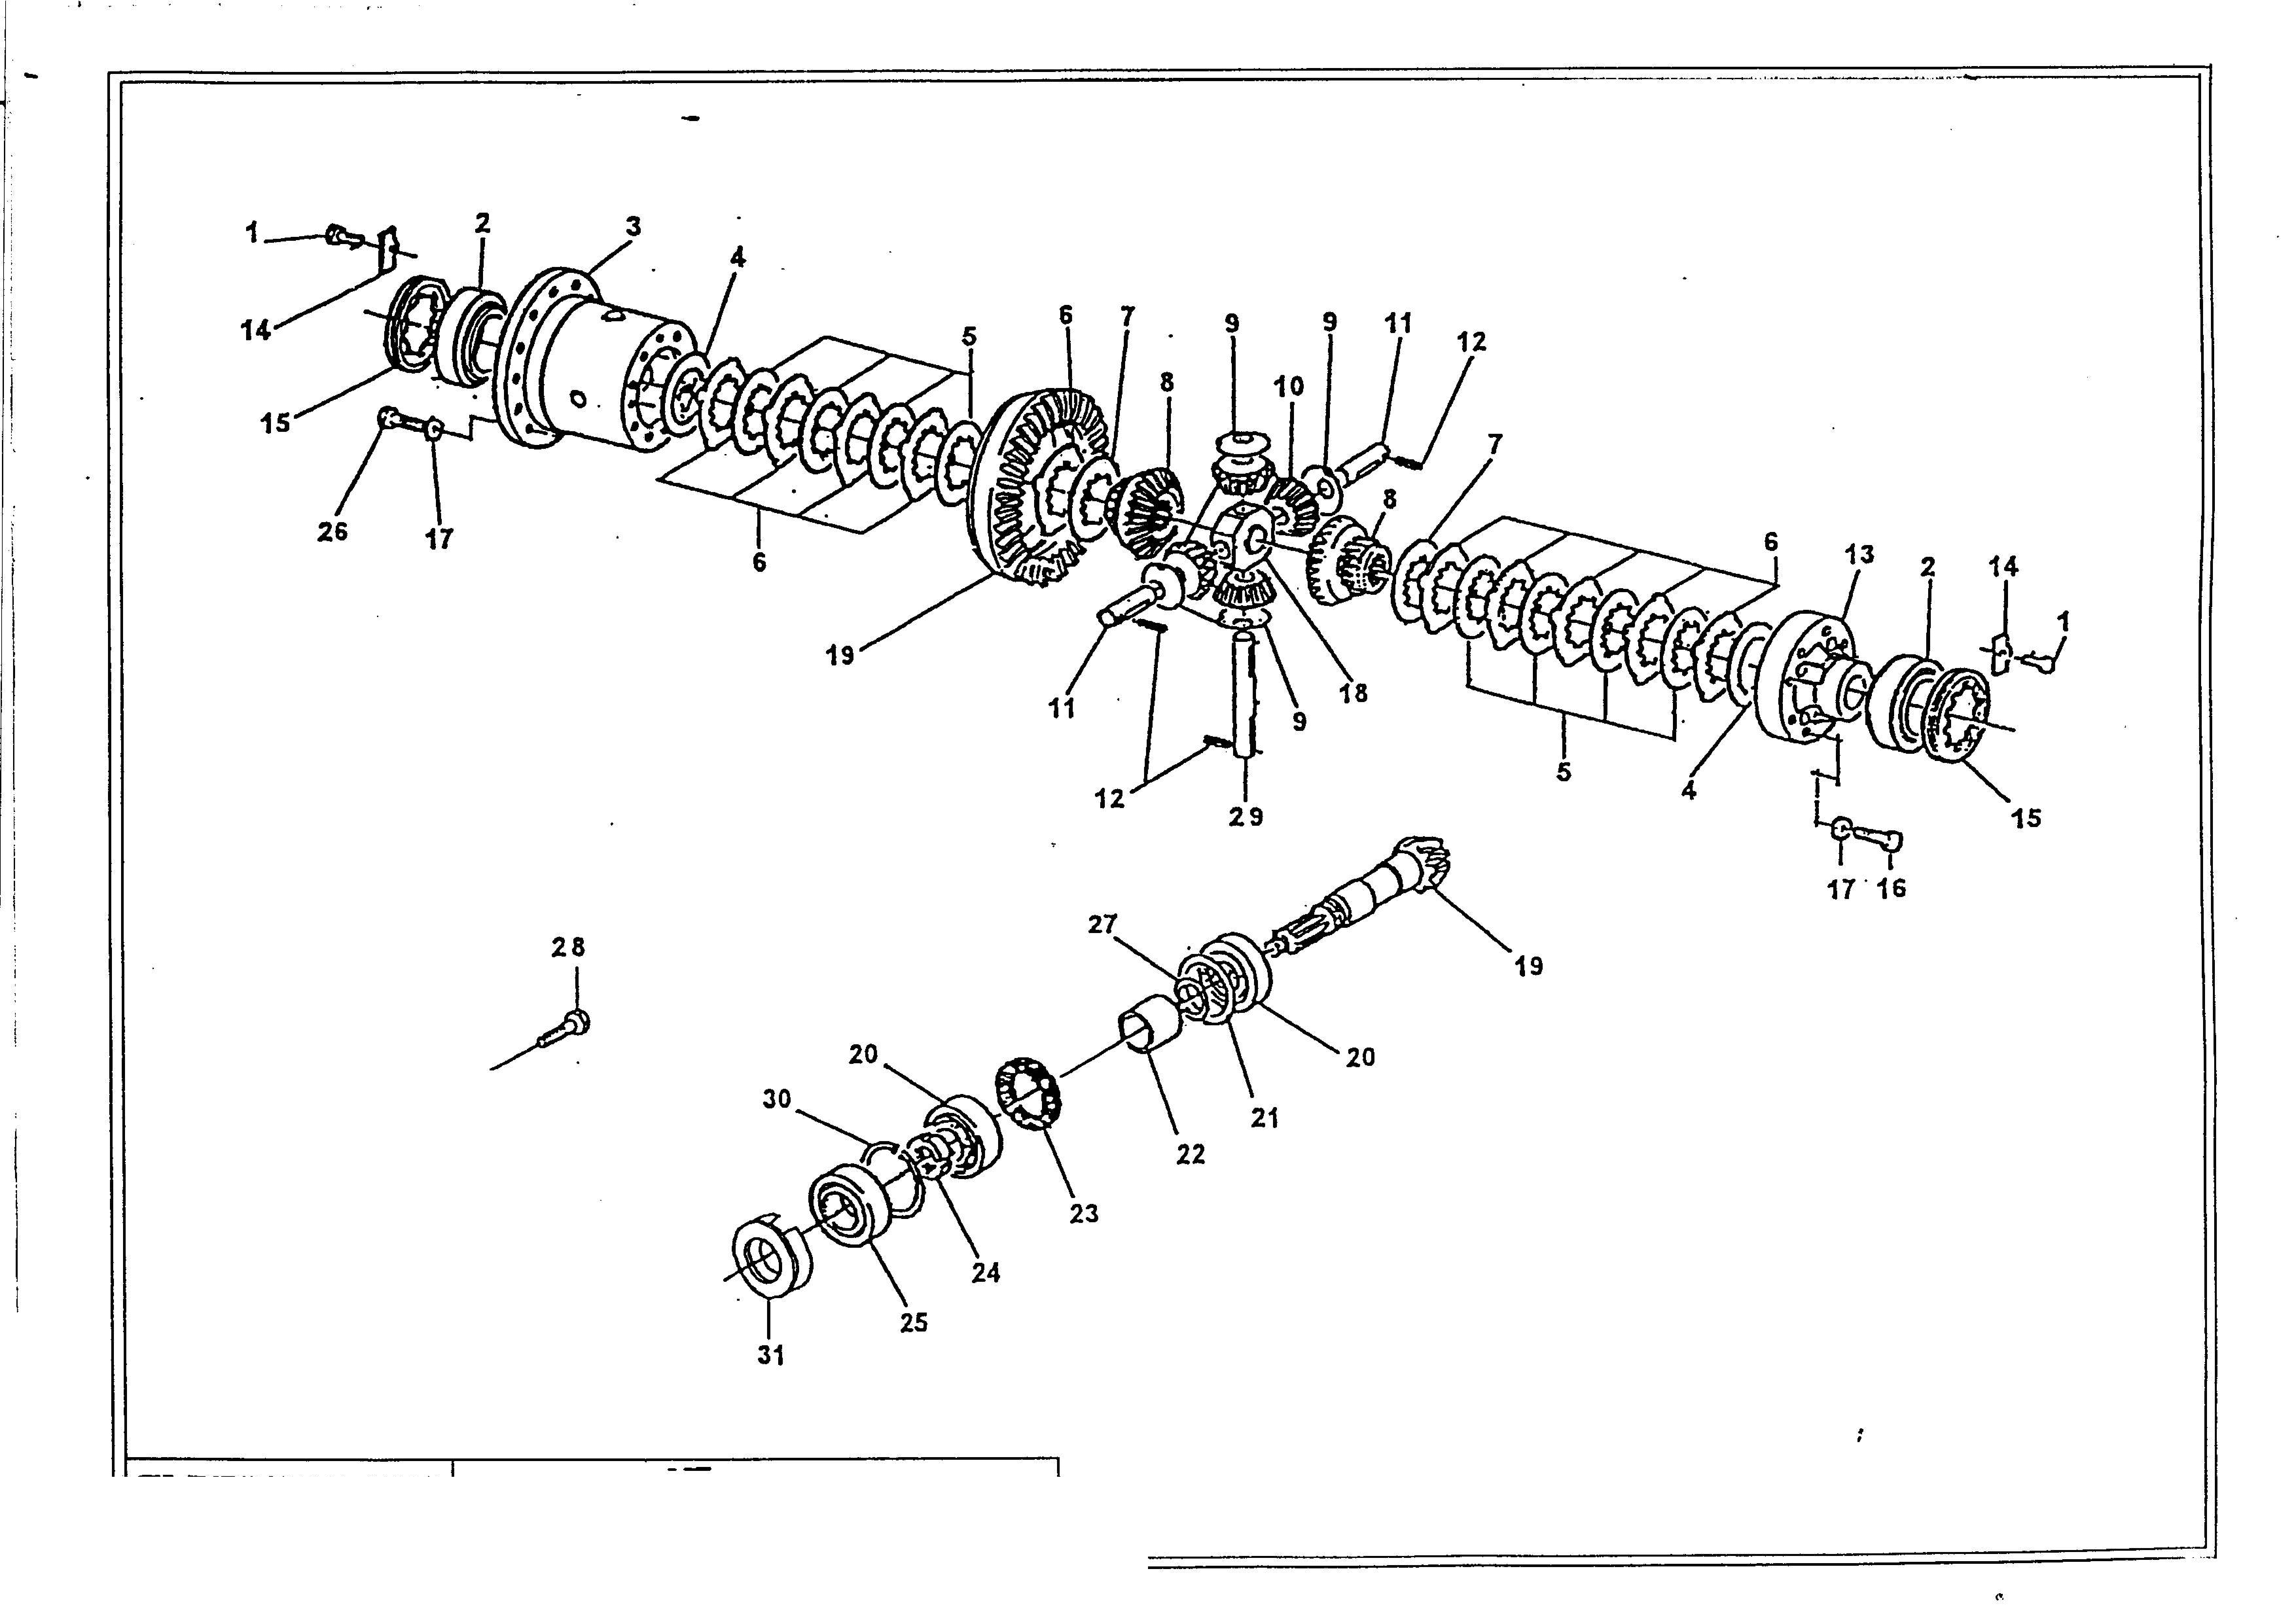 drawing for BRODERSON MANUFACTURING 0-055-00188 - SHIM (figure 3)